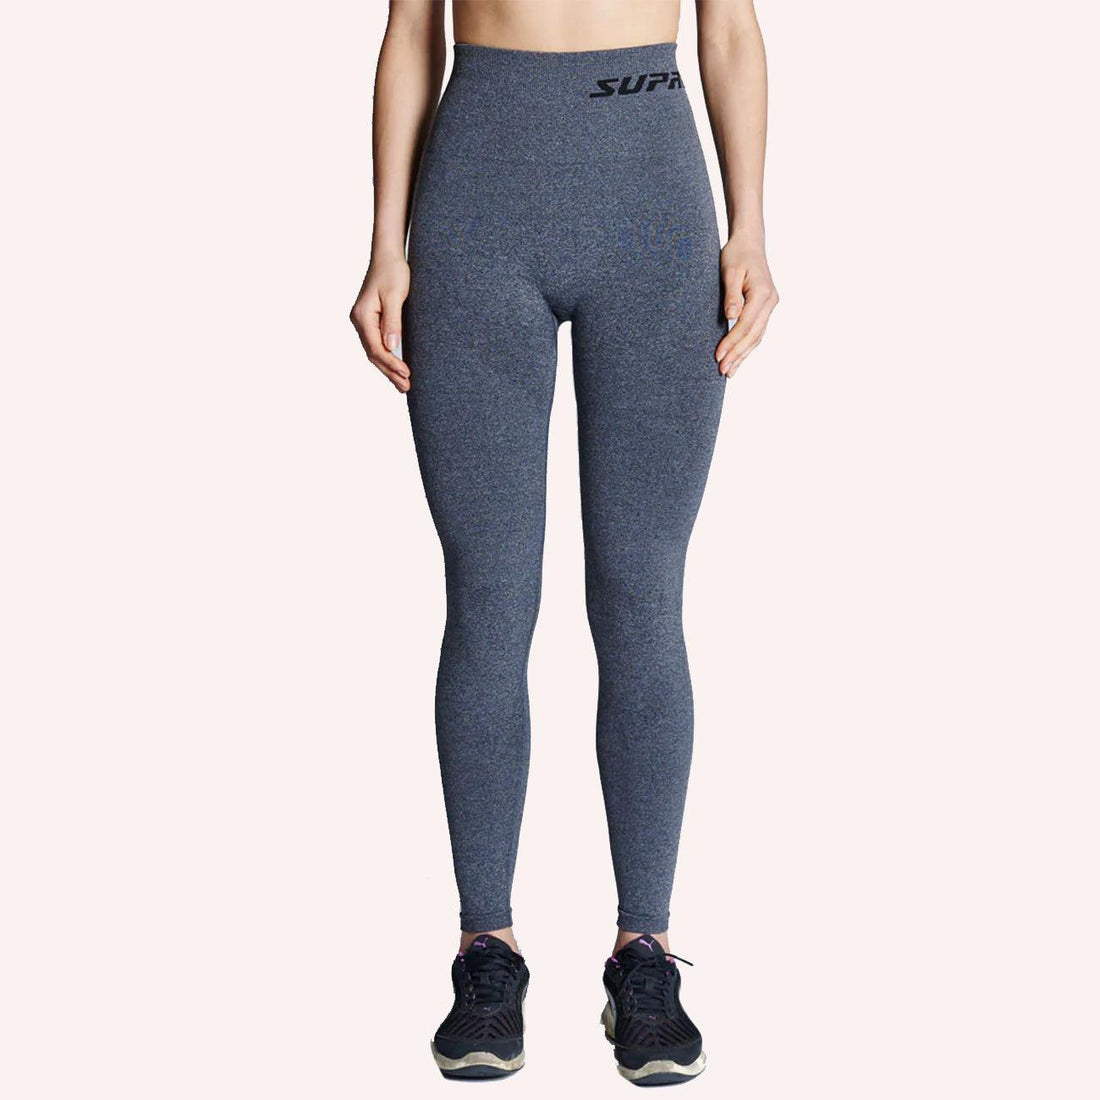 Patented Michelle Coretech Injury Recovery and Postpartum Compression Leggings - Grey Marle